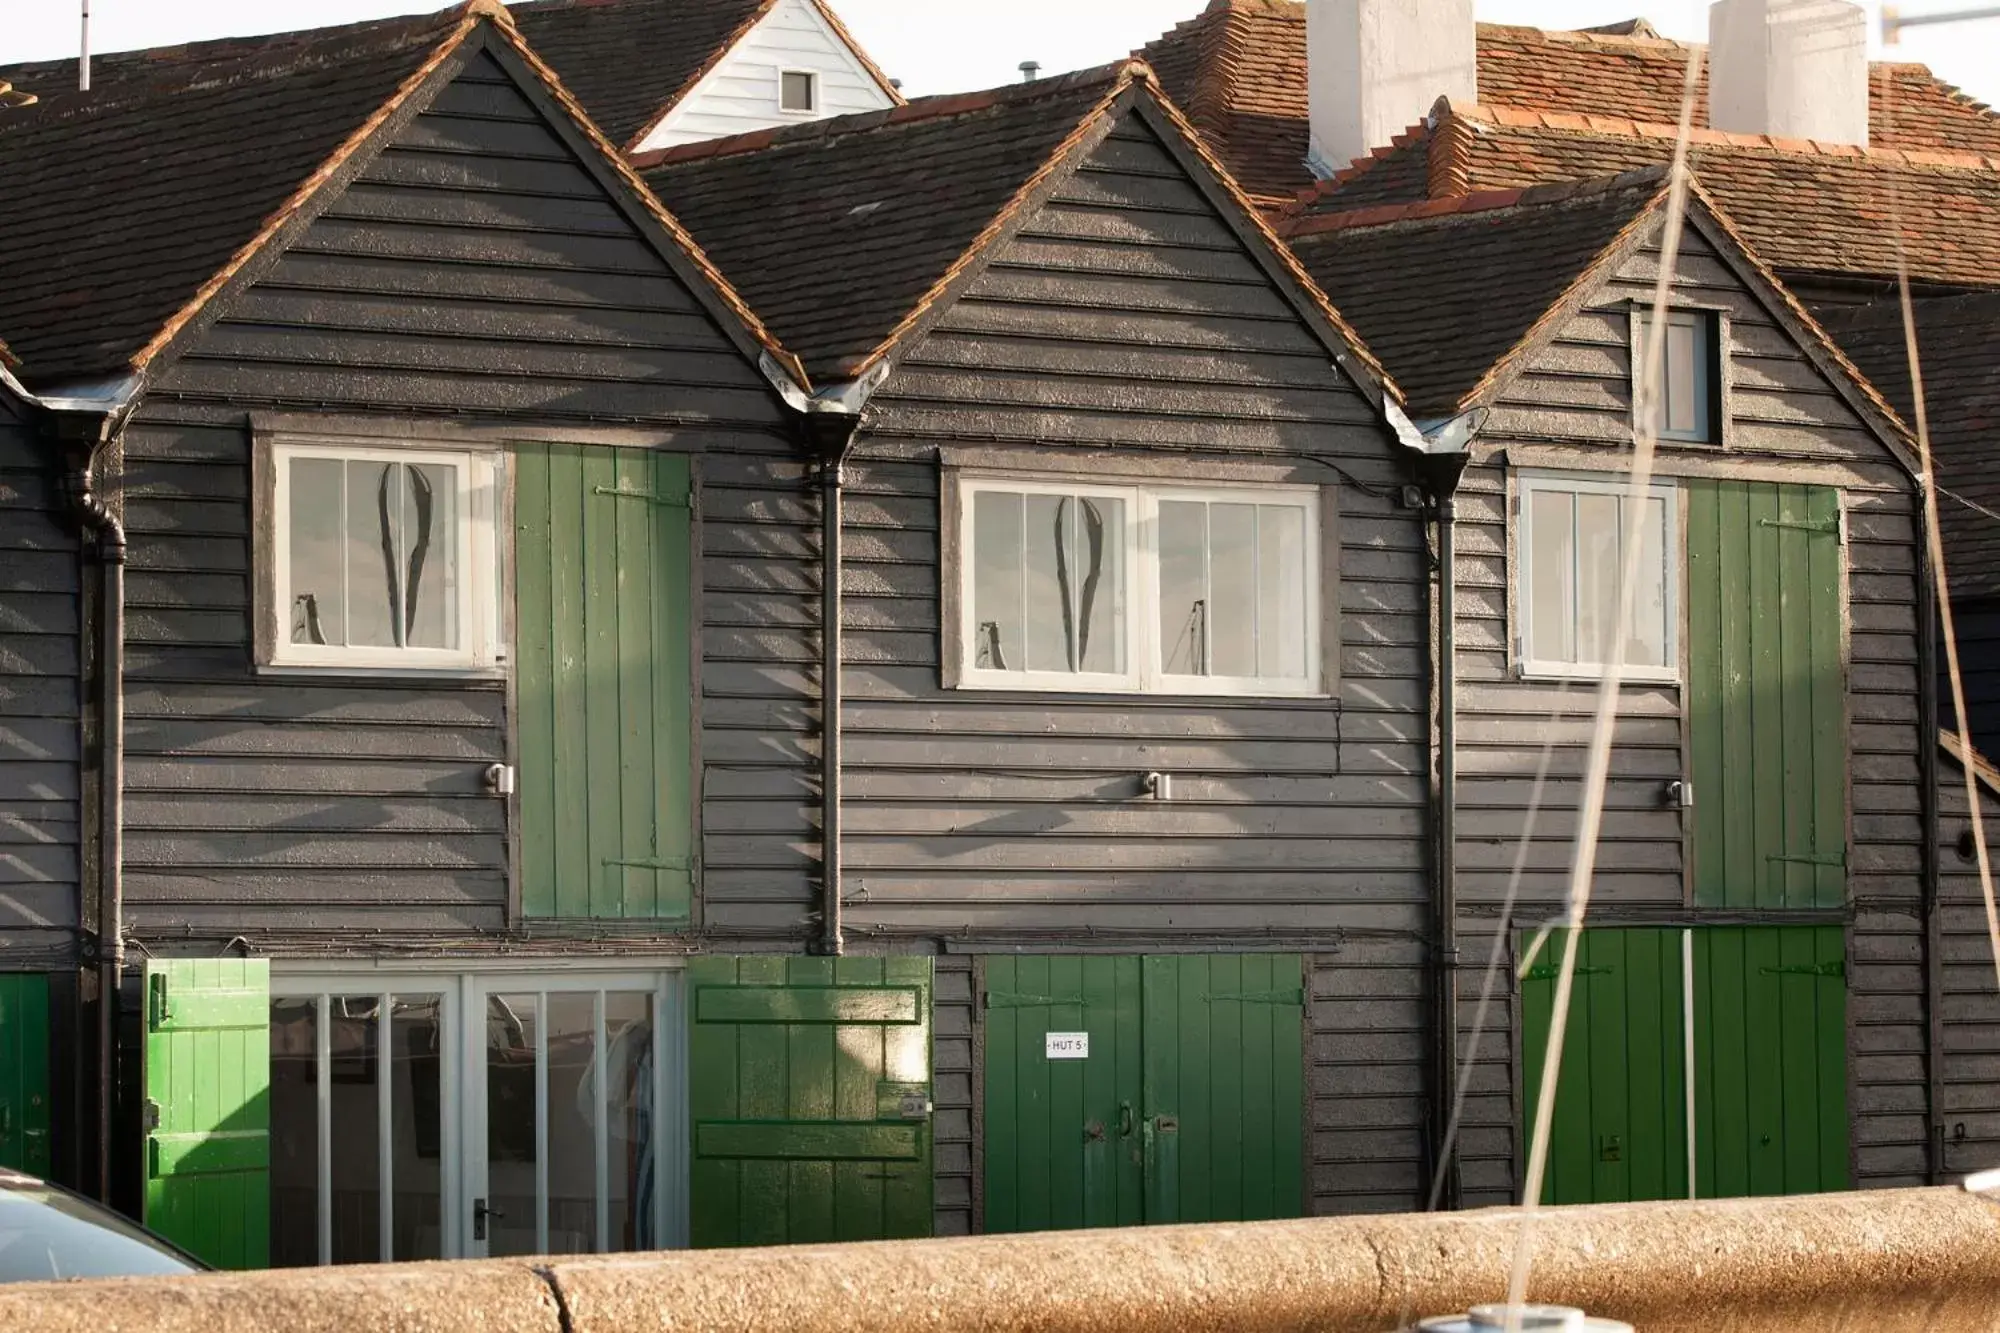 Property Building in Whitstable Fisherman's Huts